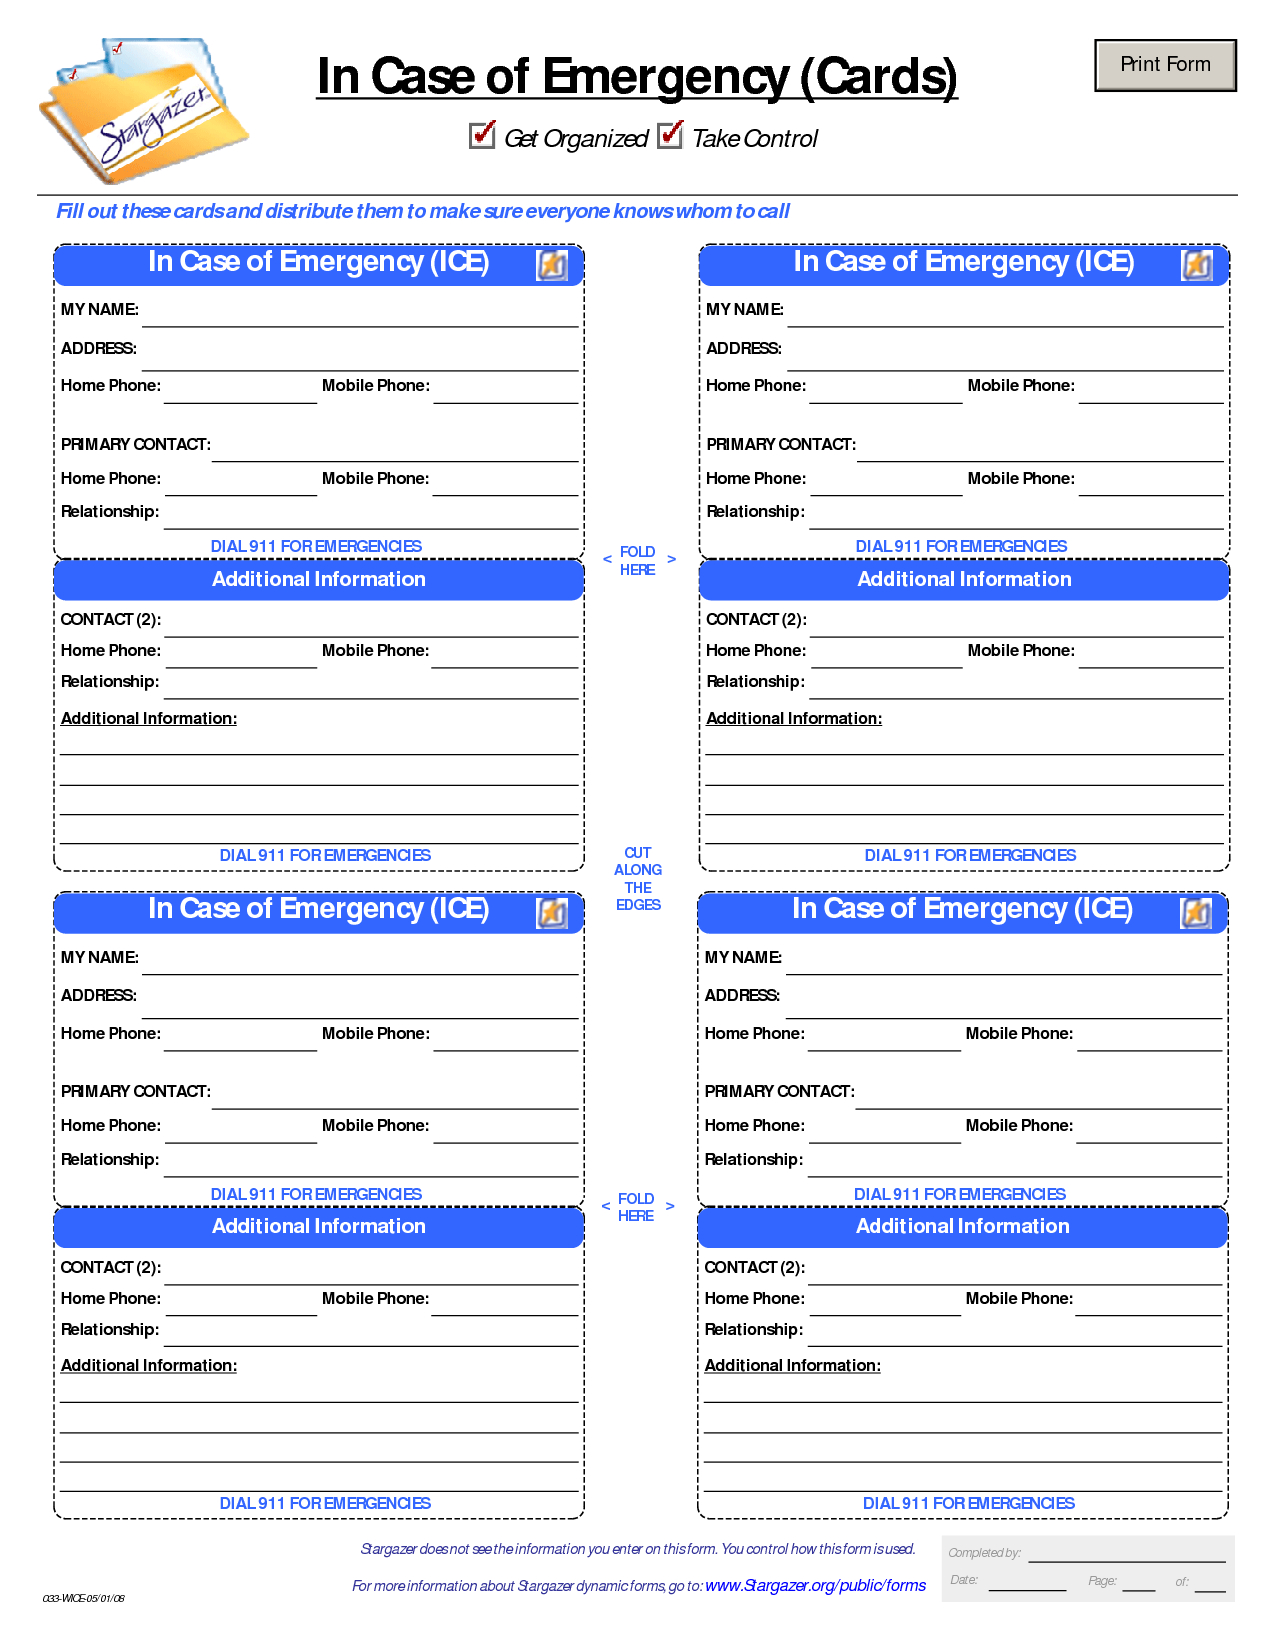 Id Card Template  In Case Of Emergency Cards  School  Id Card regarding In Case Of Emergency Card Template